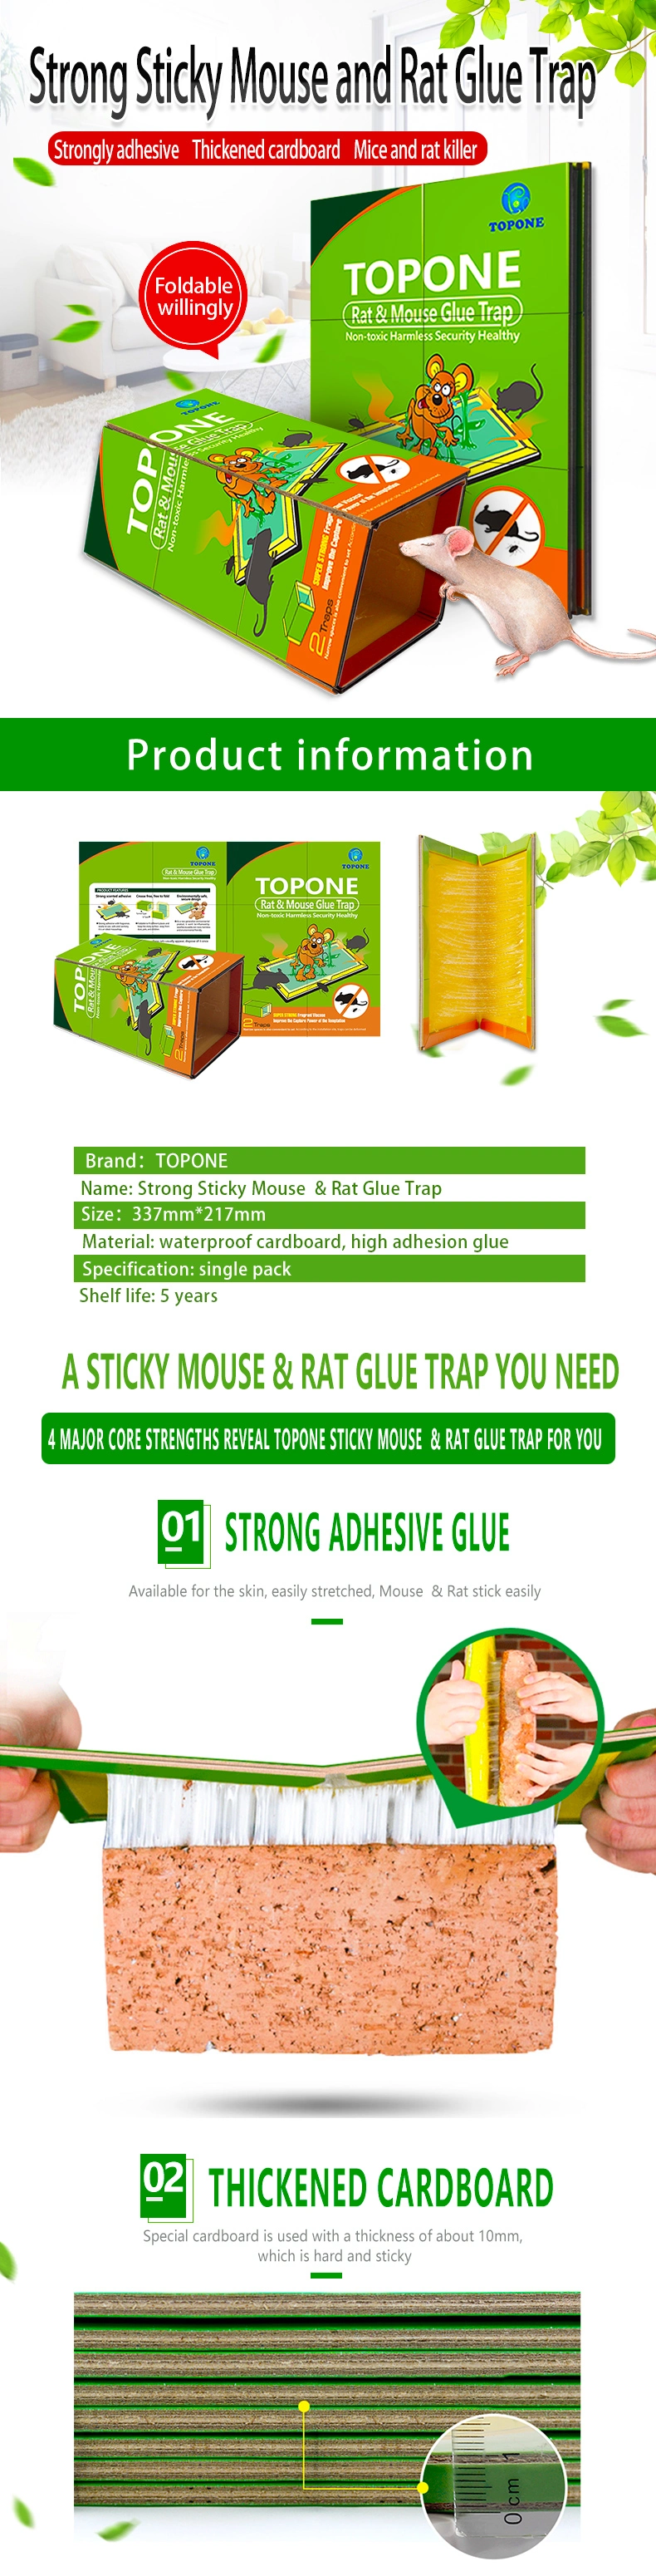 Topone Highly Sticking Rat Traps Catching and Holding Rat & Mouse Glue Traps Pest Control Mouse Trap